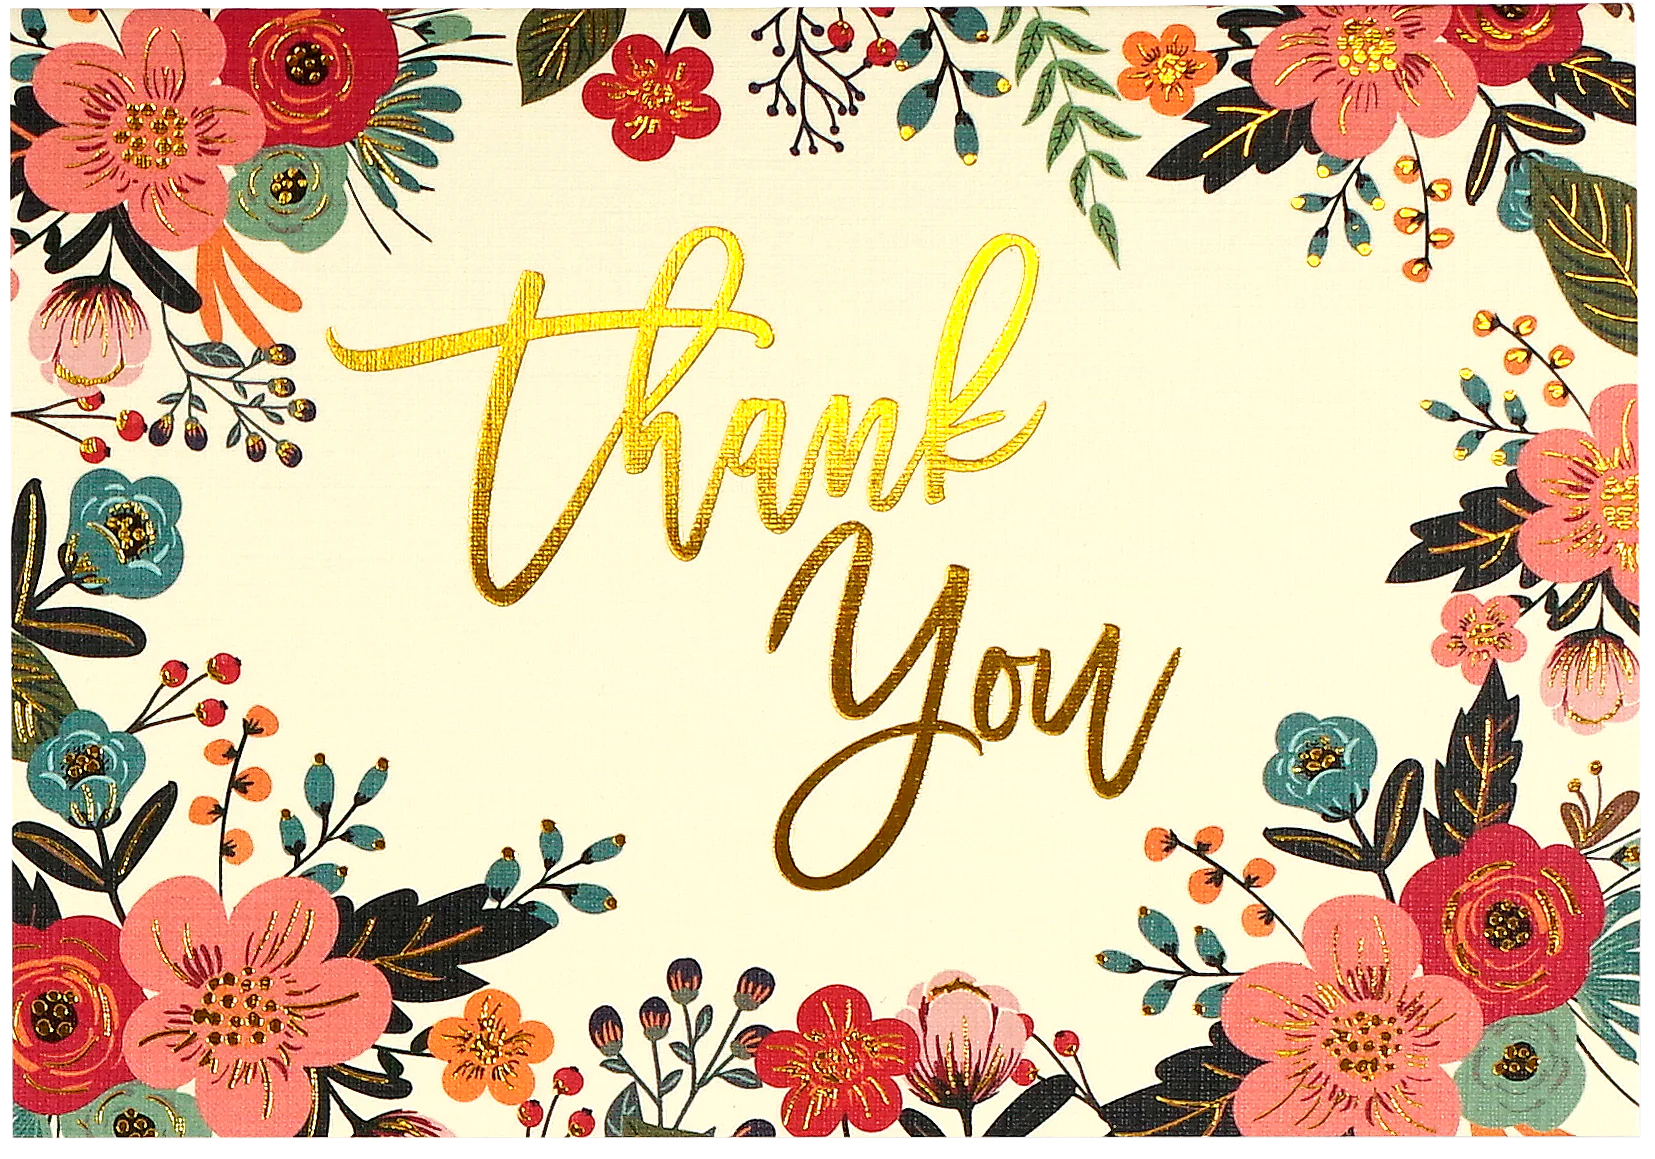 Floral Thank You Cards, Box Of 14